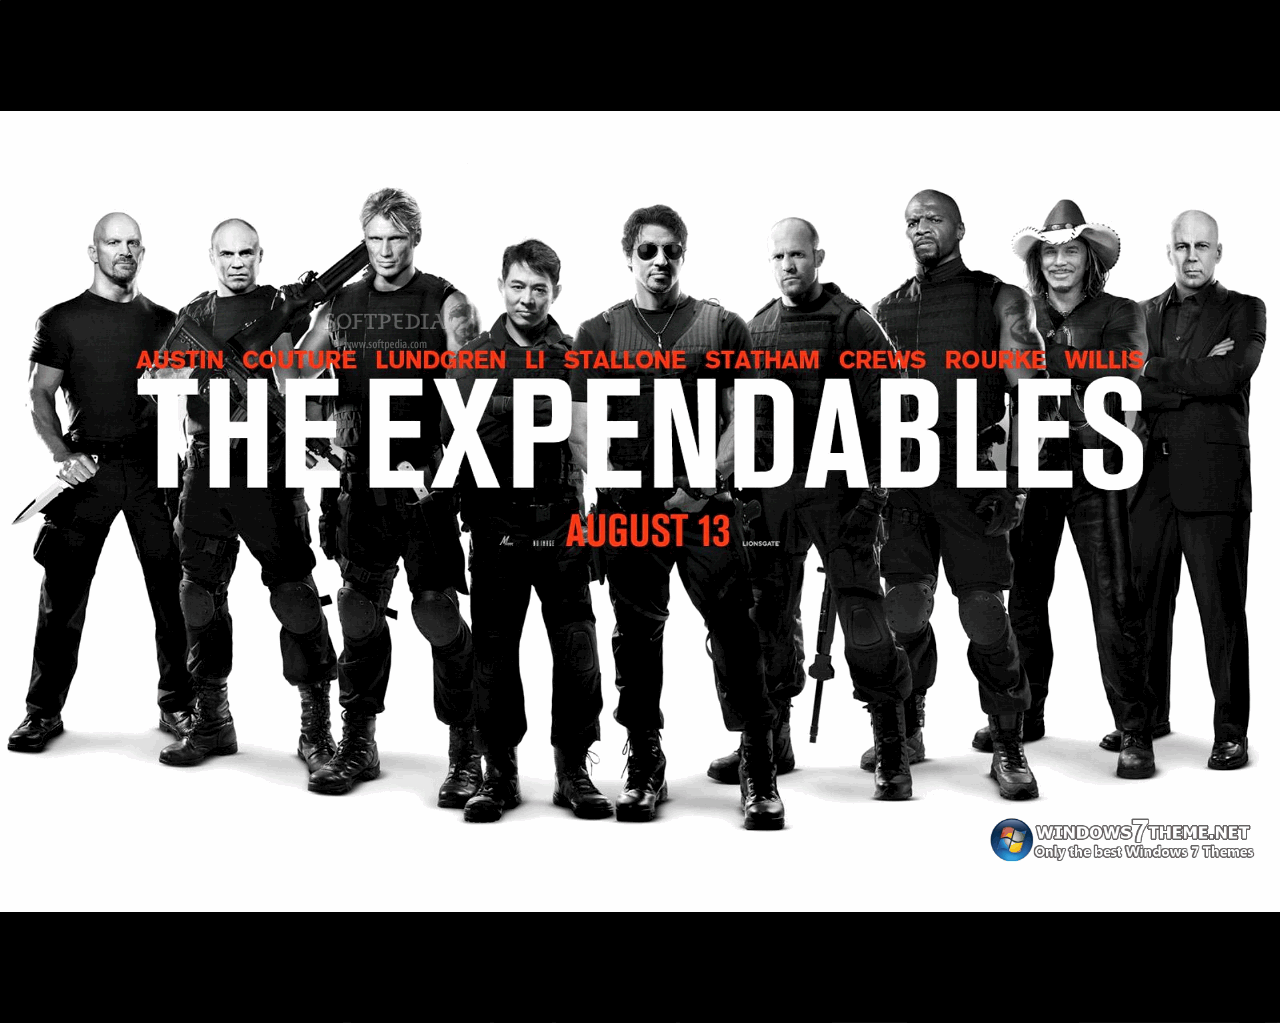 The-Expendables-Windows-7-Theme_1.png